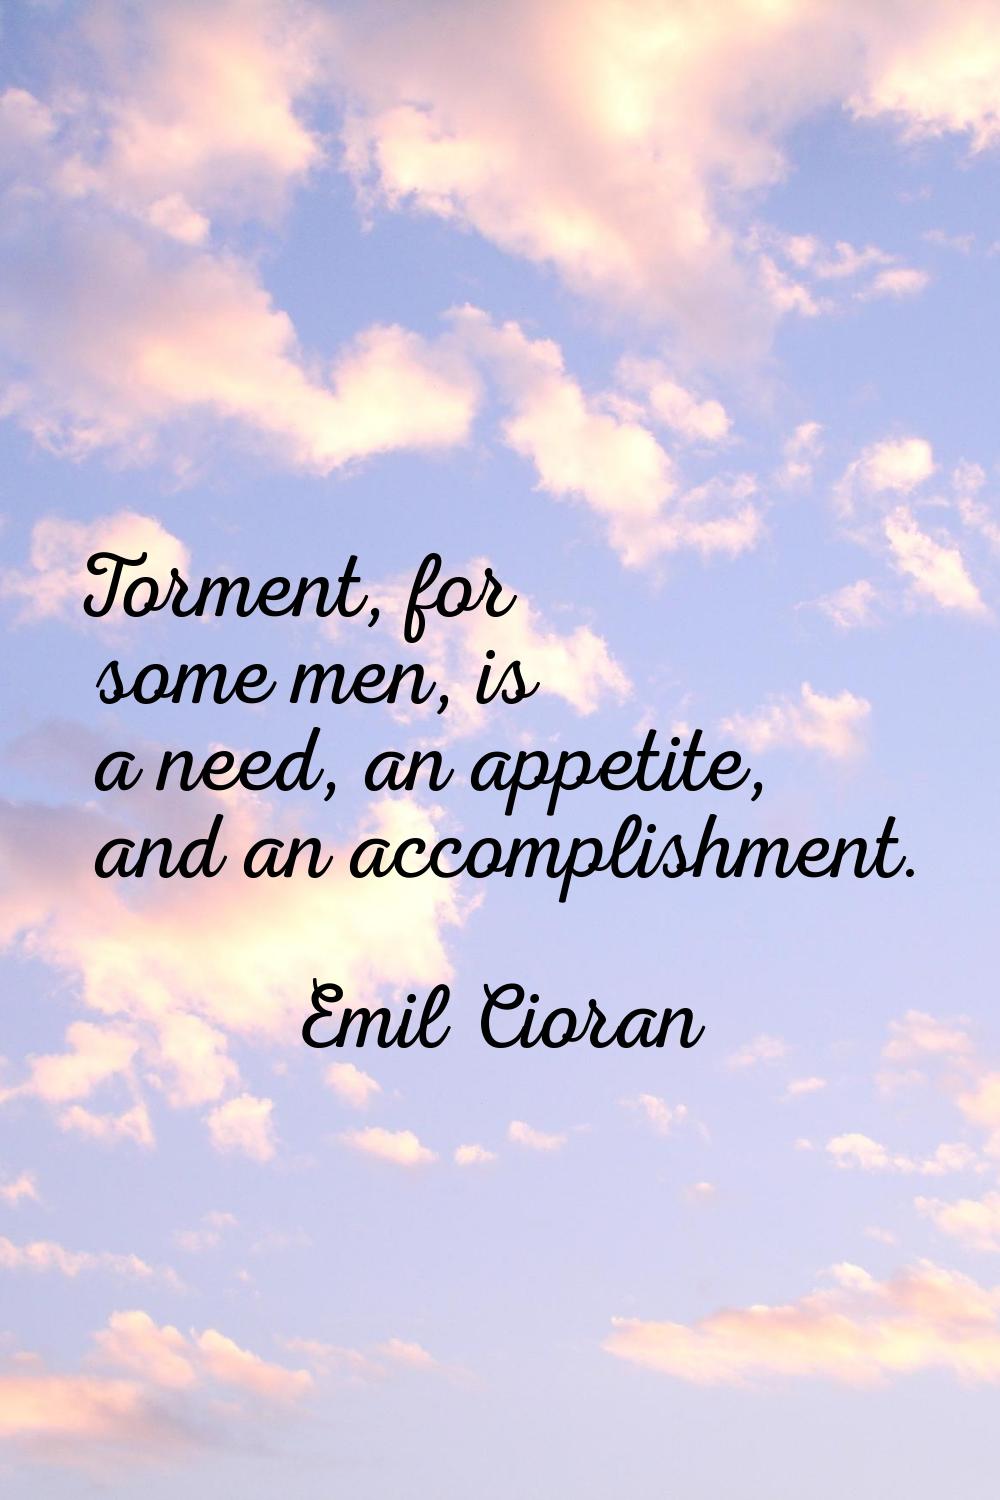 Torment, for some men, is a need, an appetite, and an accomplishment.